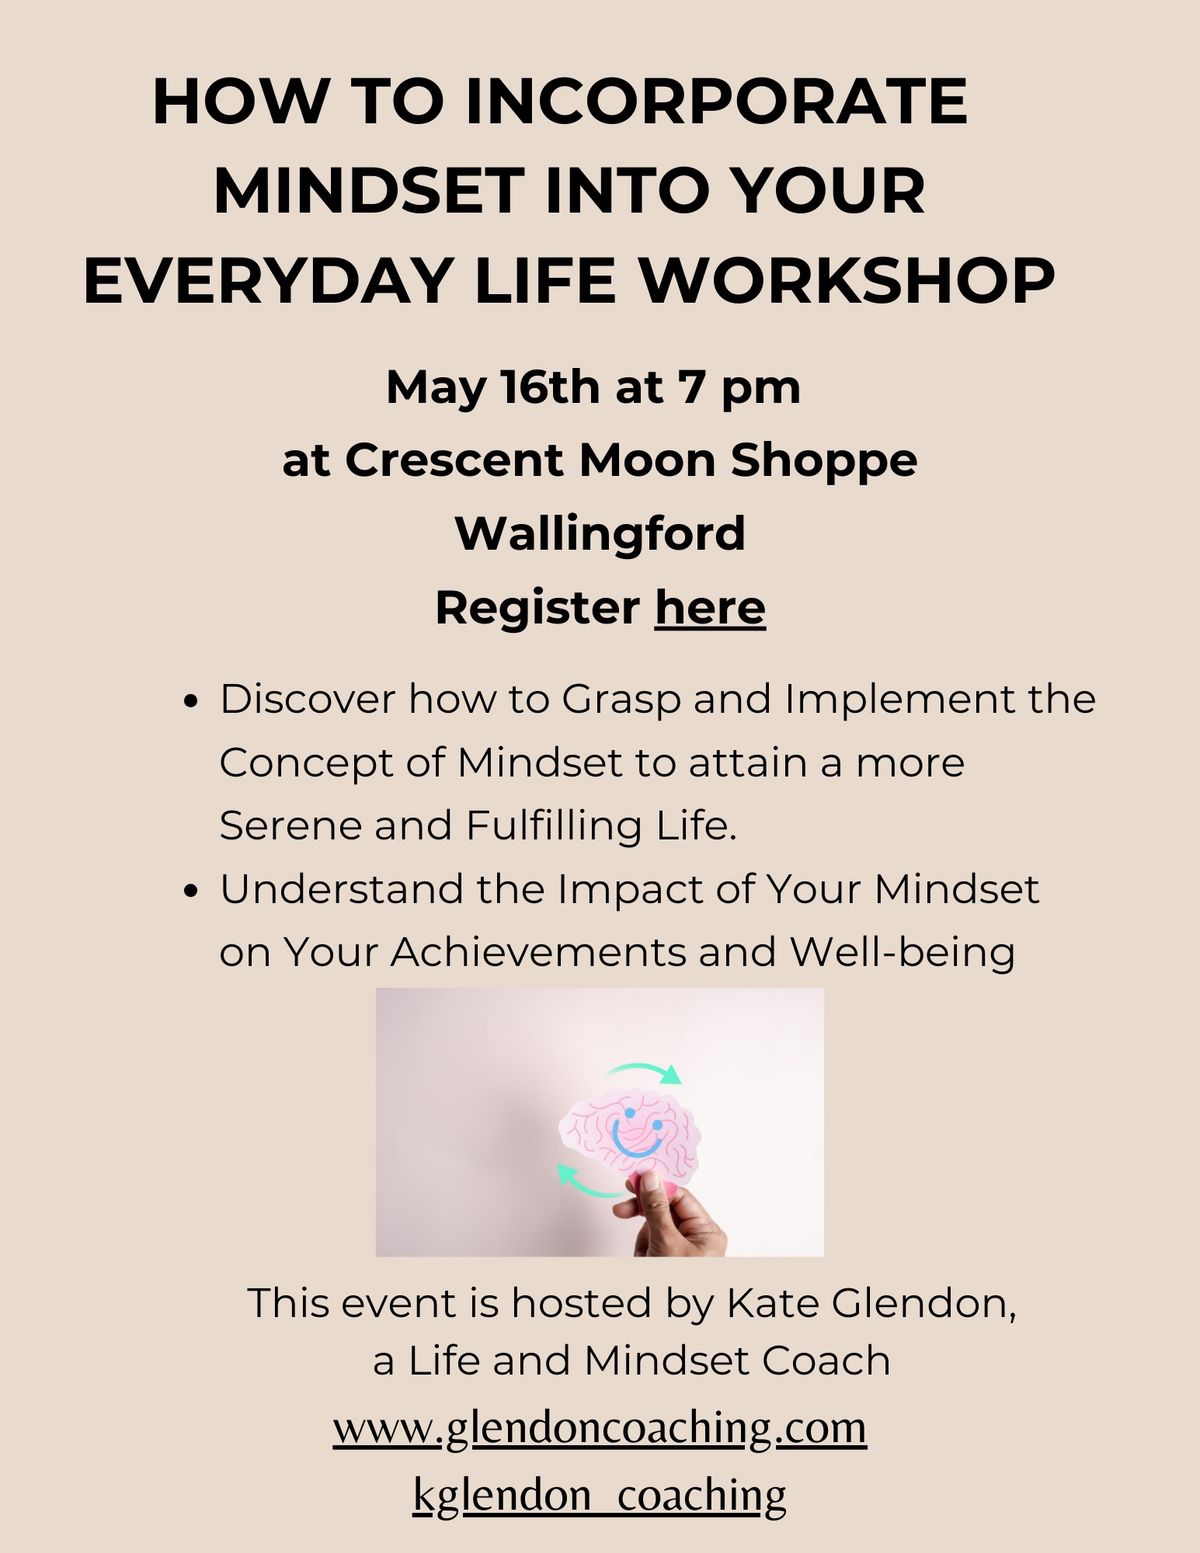 How To Incorporate Mindset Into Your Everyday Life Workshop